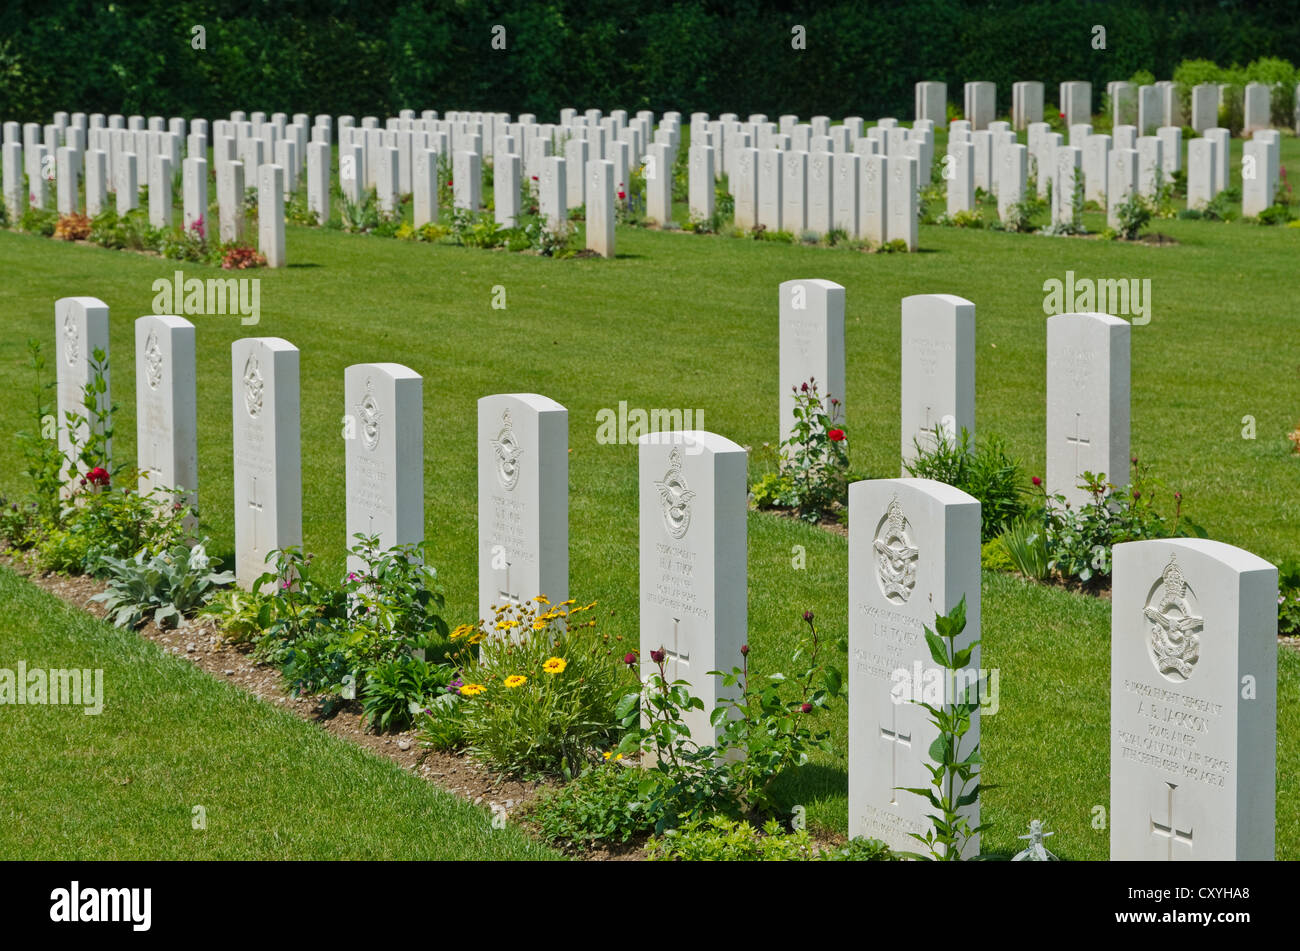 Durnbach War Cemetery, the final resting place for 2960 soldiers who died in WW2, Duernbach, Gmund am Tegernsee, Bavaria Stock Photo